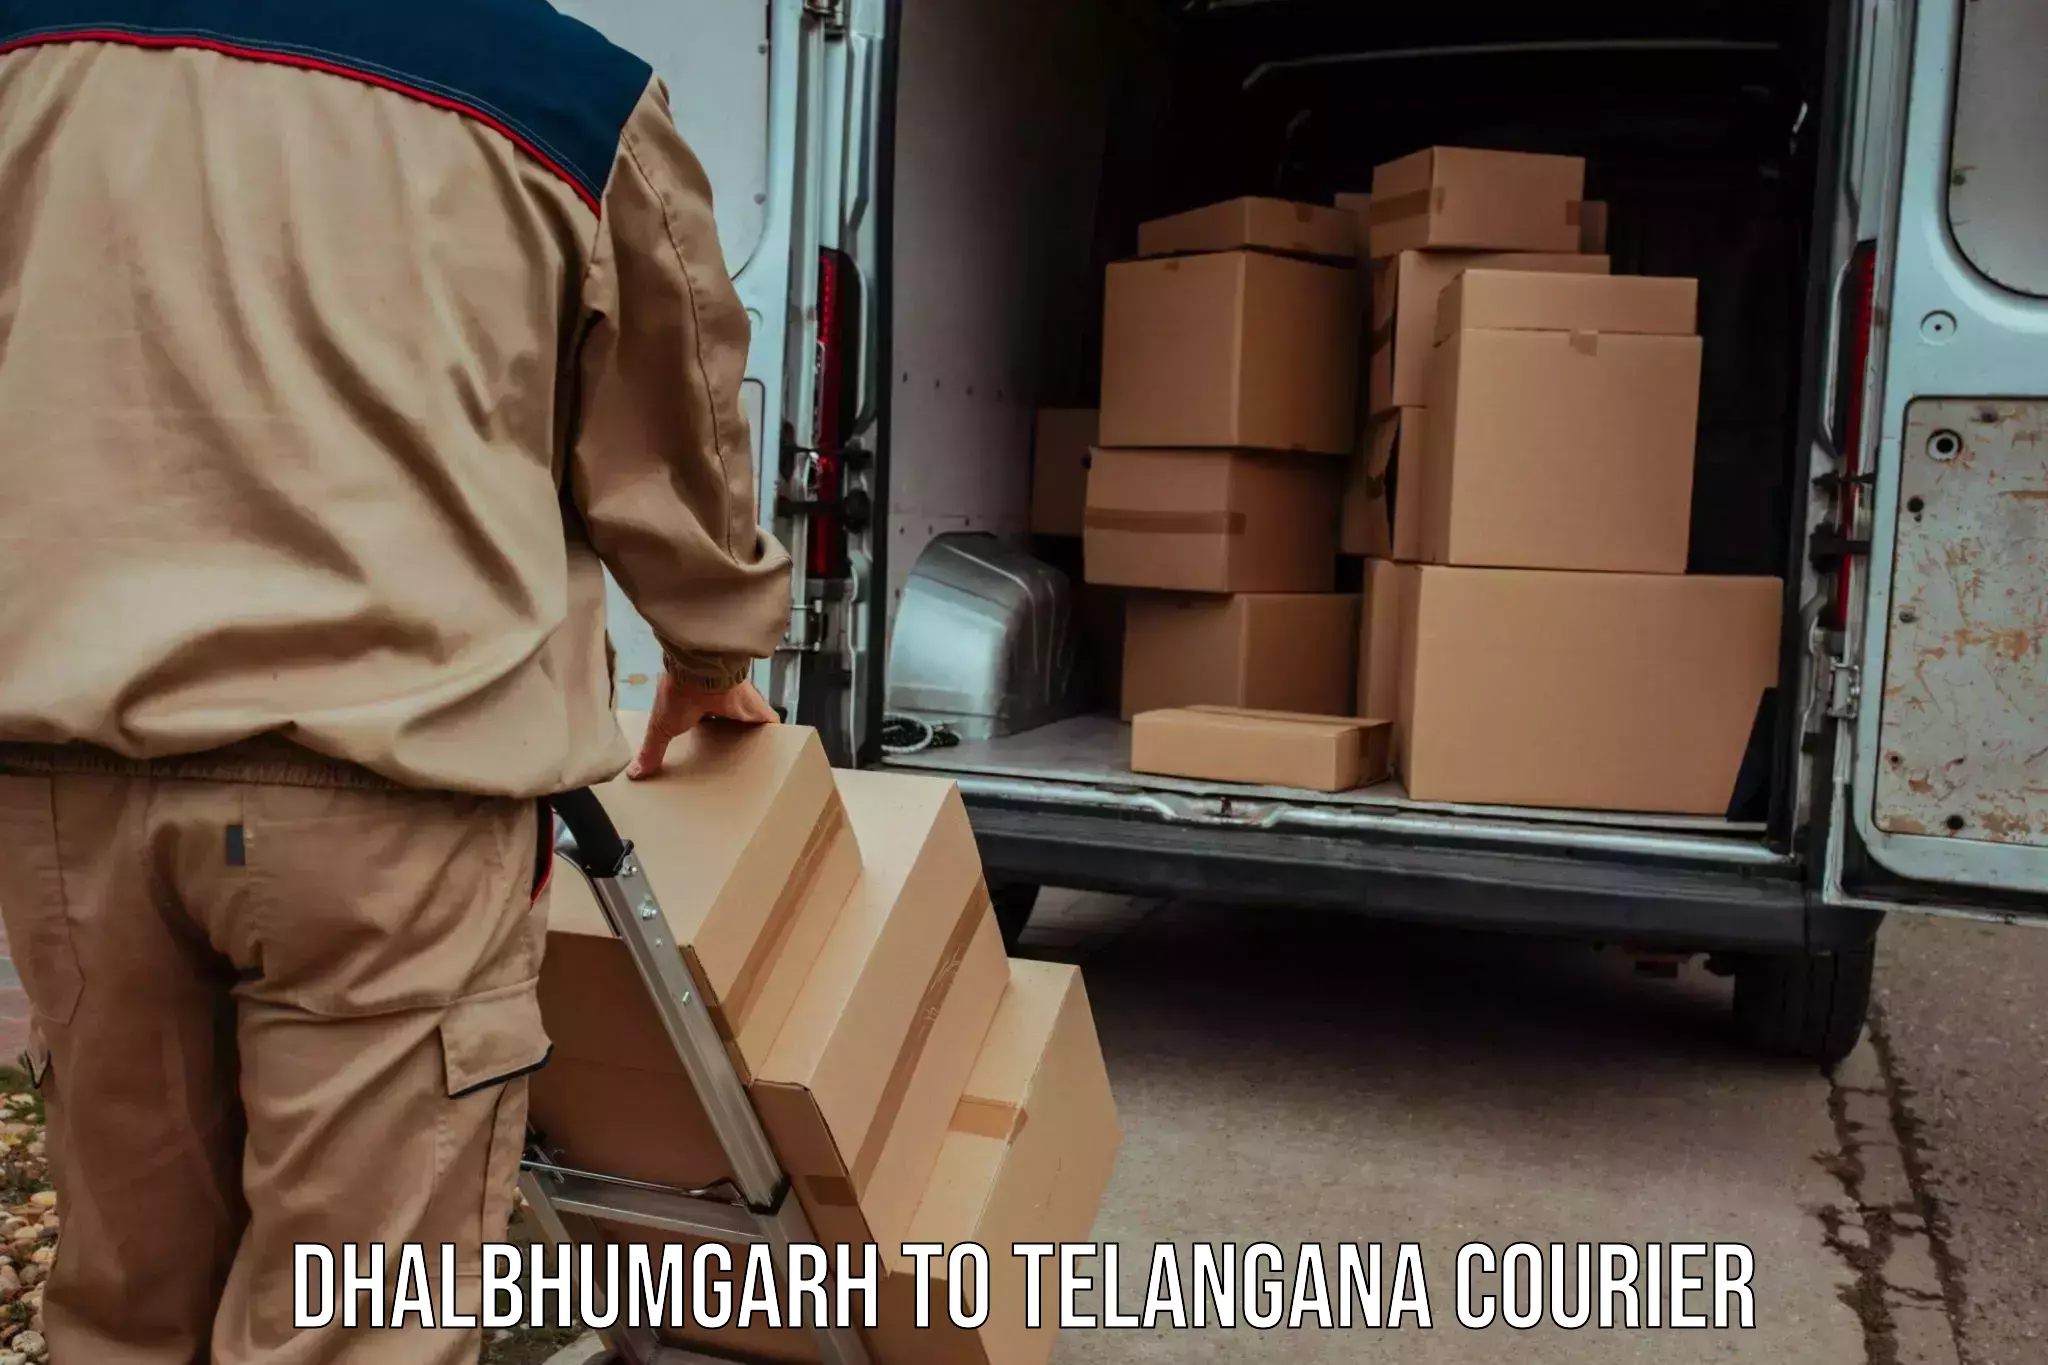 24-hour courier services Dhalbhumgarh to Secunderabad